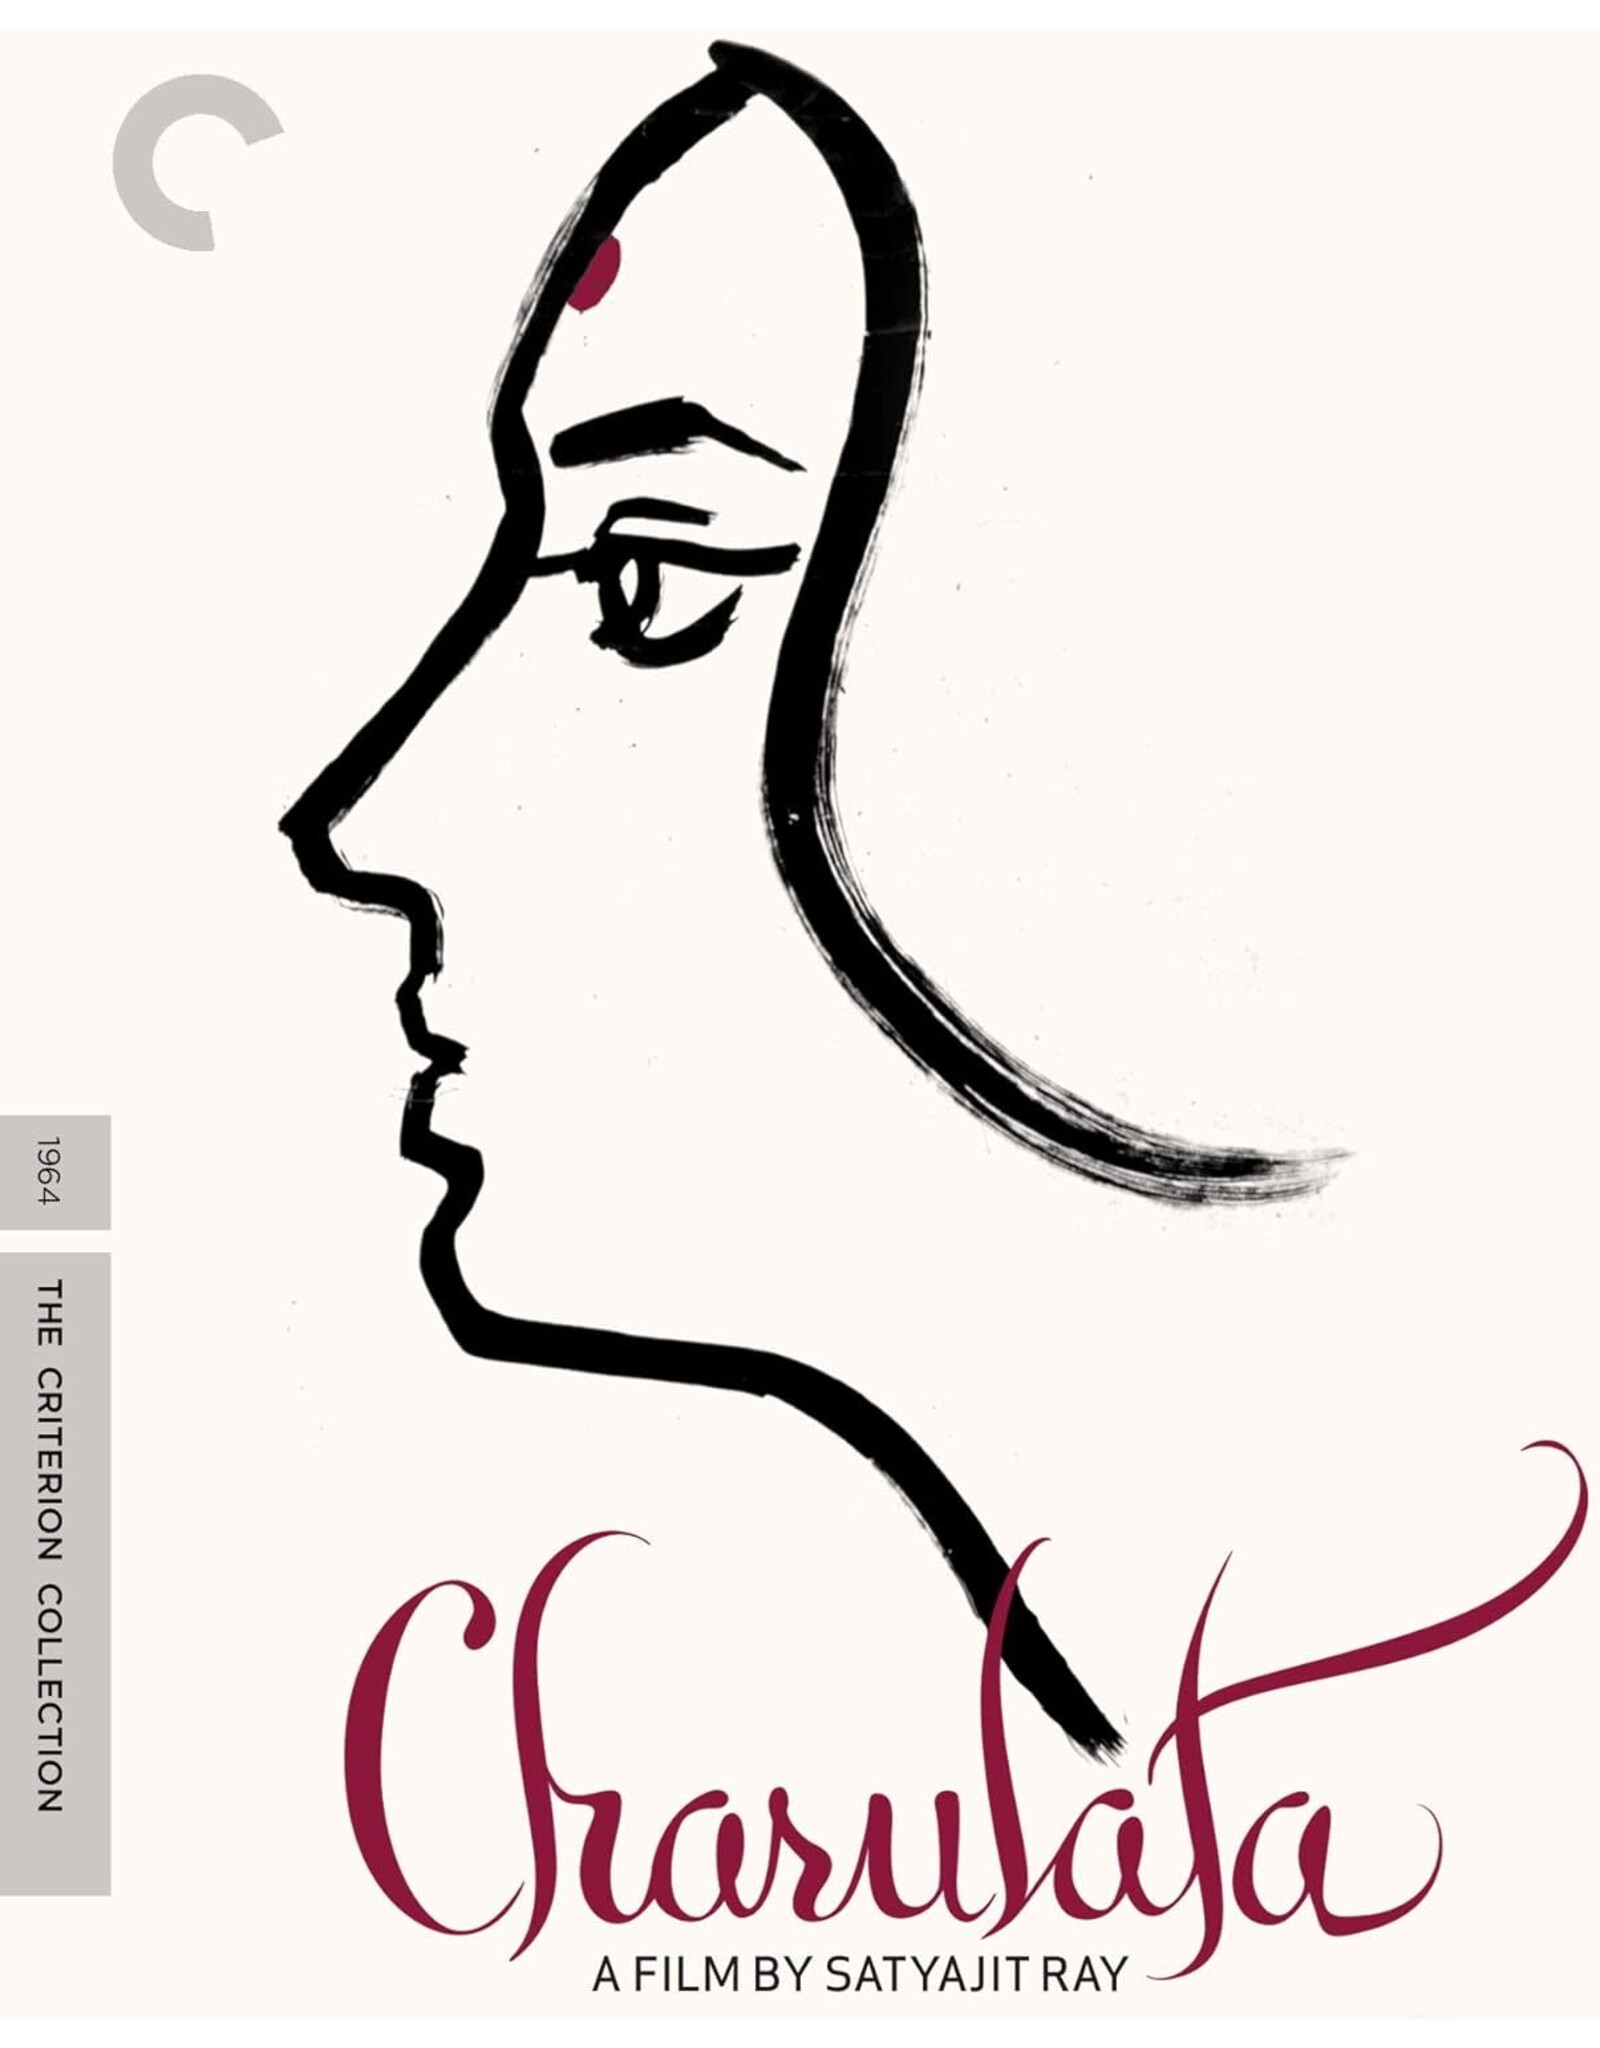 Criterion Collection Charulata - Criterion Collection (Brand New)